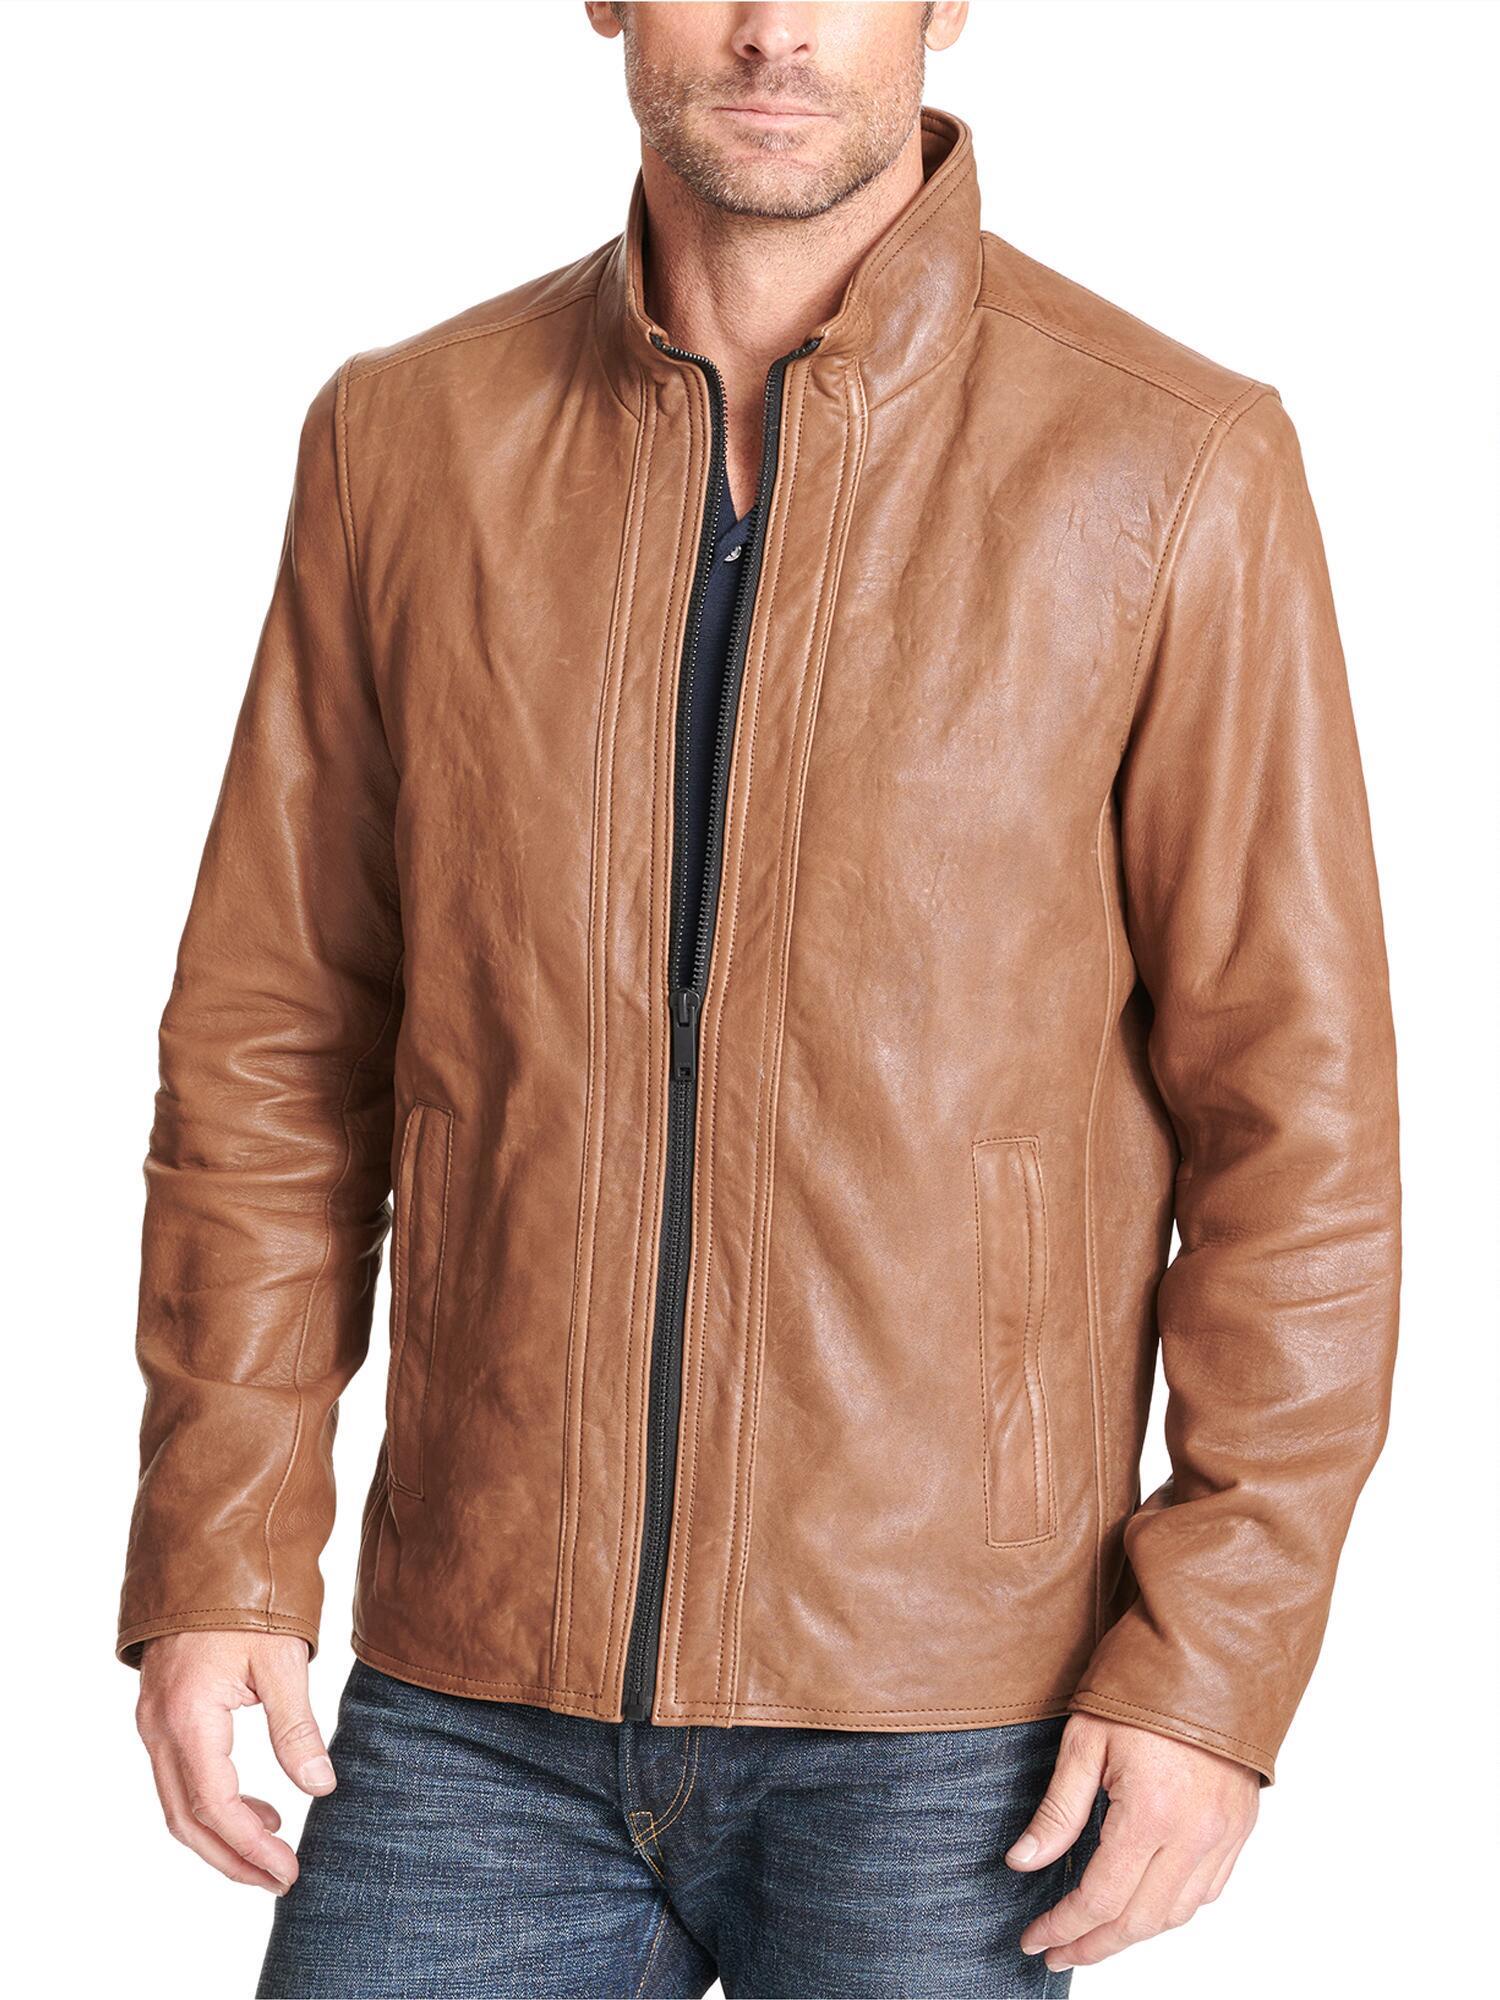 Wilsons Leather Buttery Soft Genuine Leather Jacket in Brown for Men - Lyst